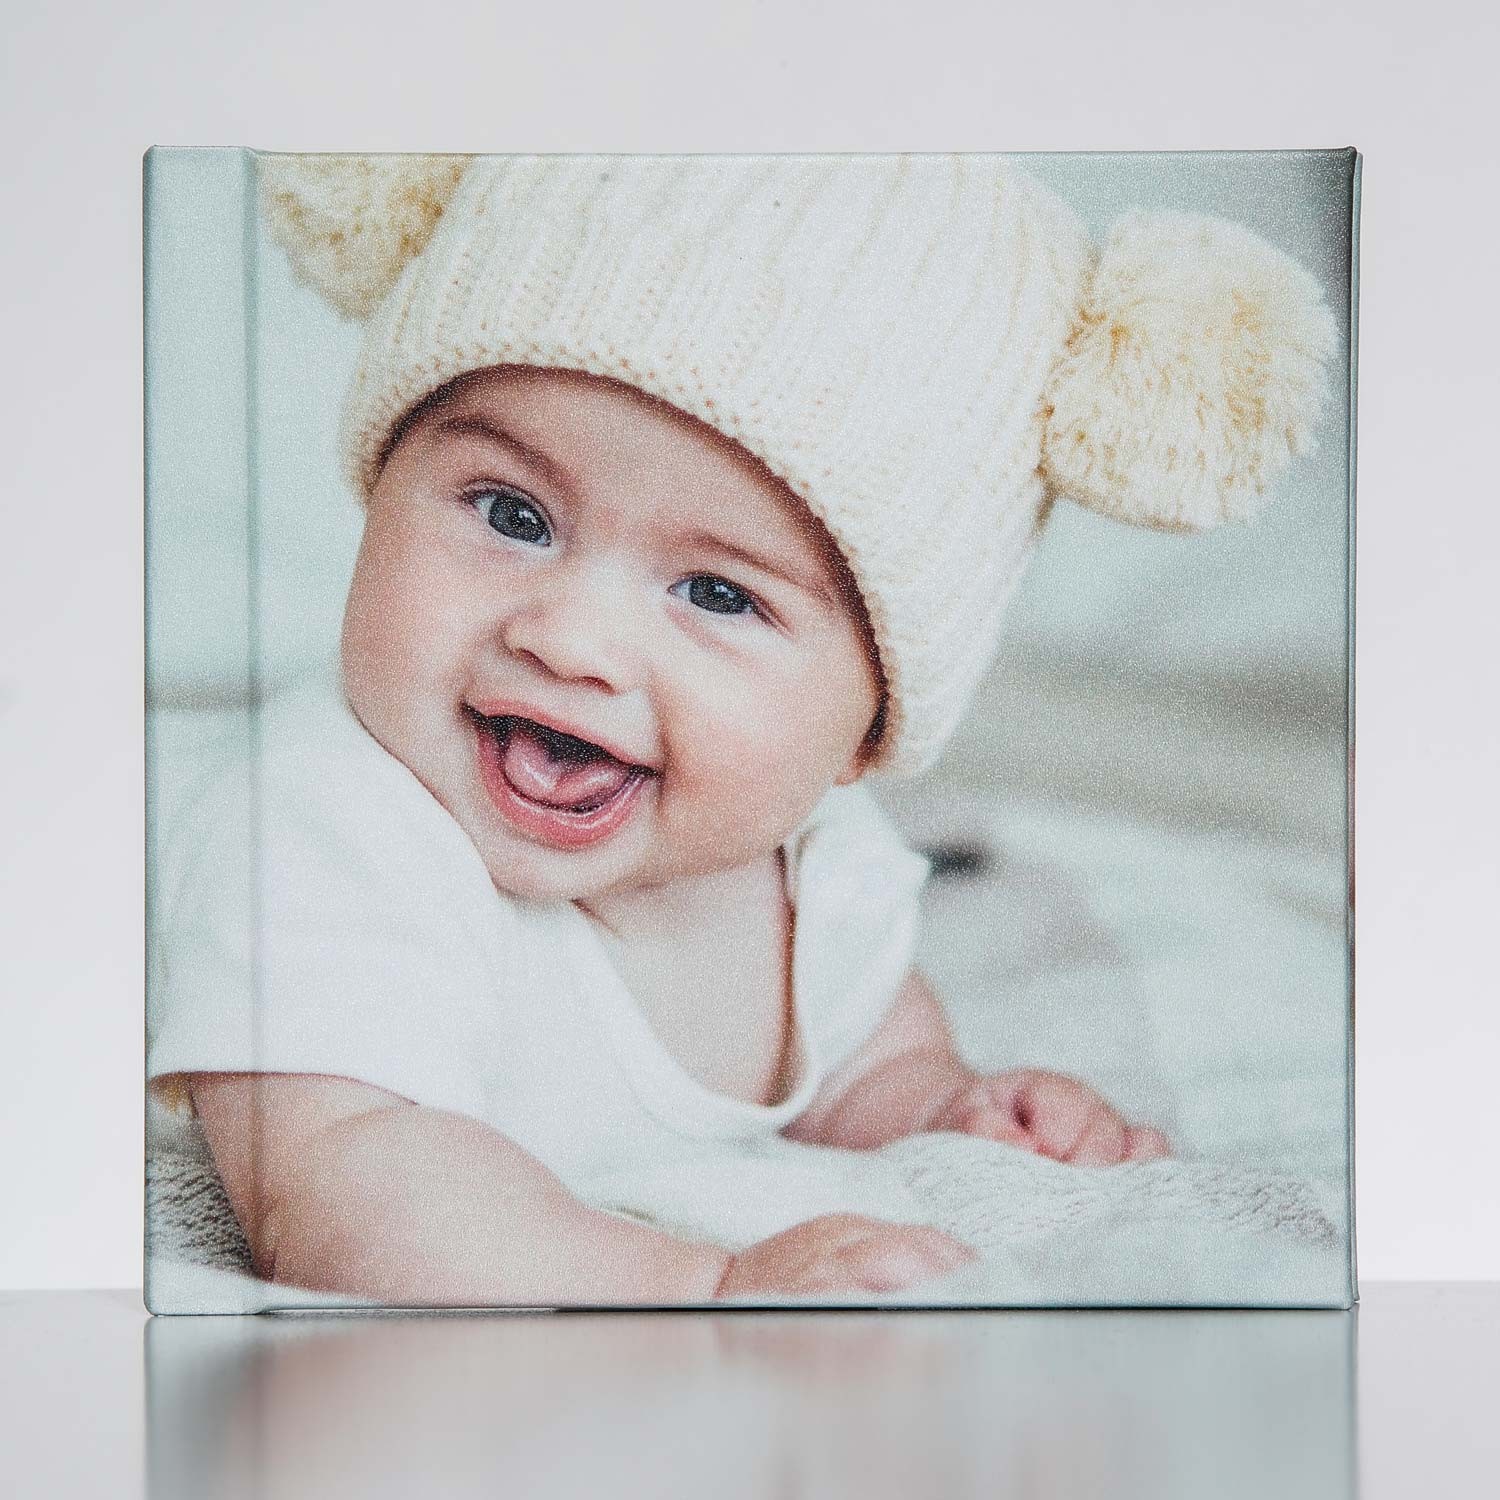 Silverbook 15x15cm with Photo Cover